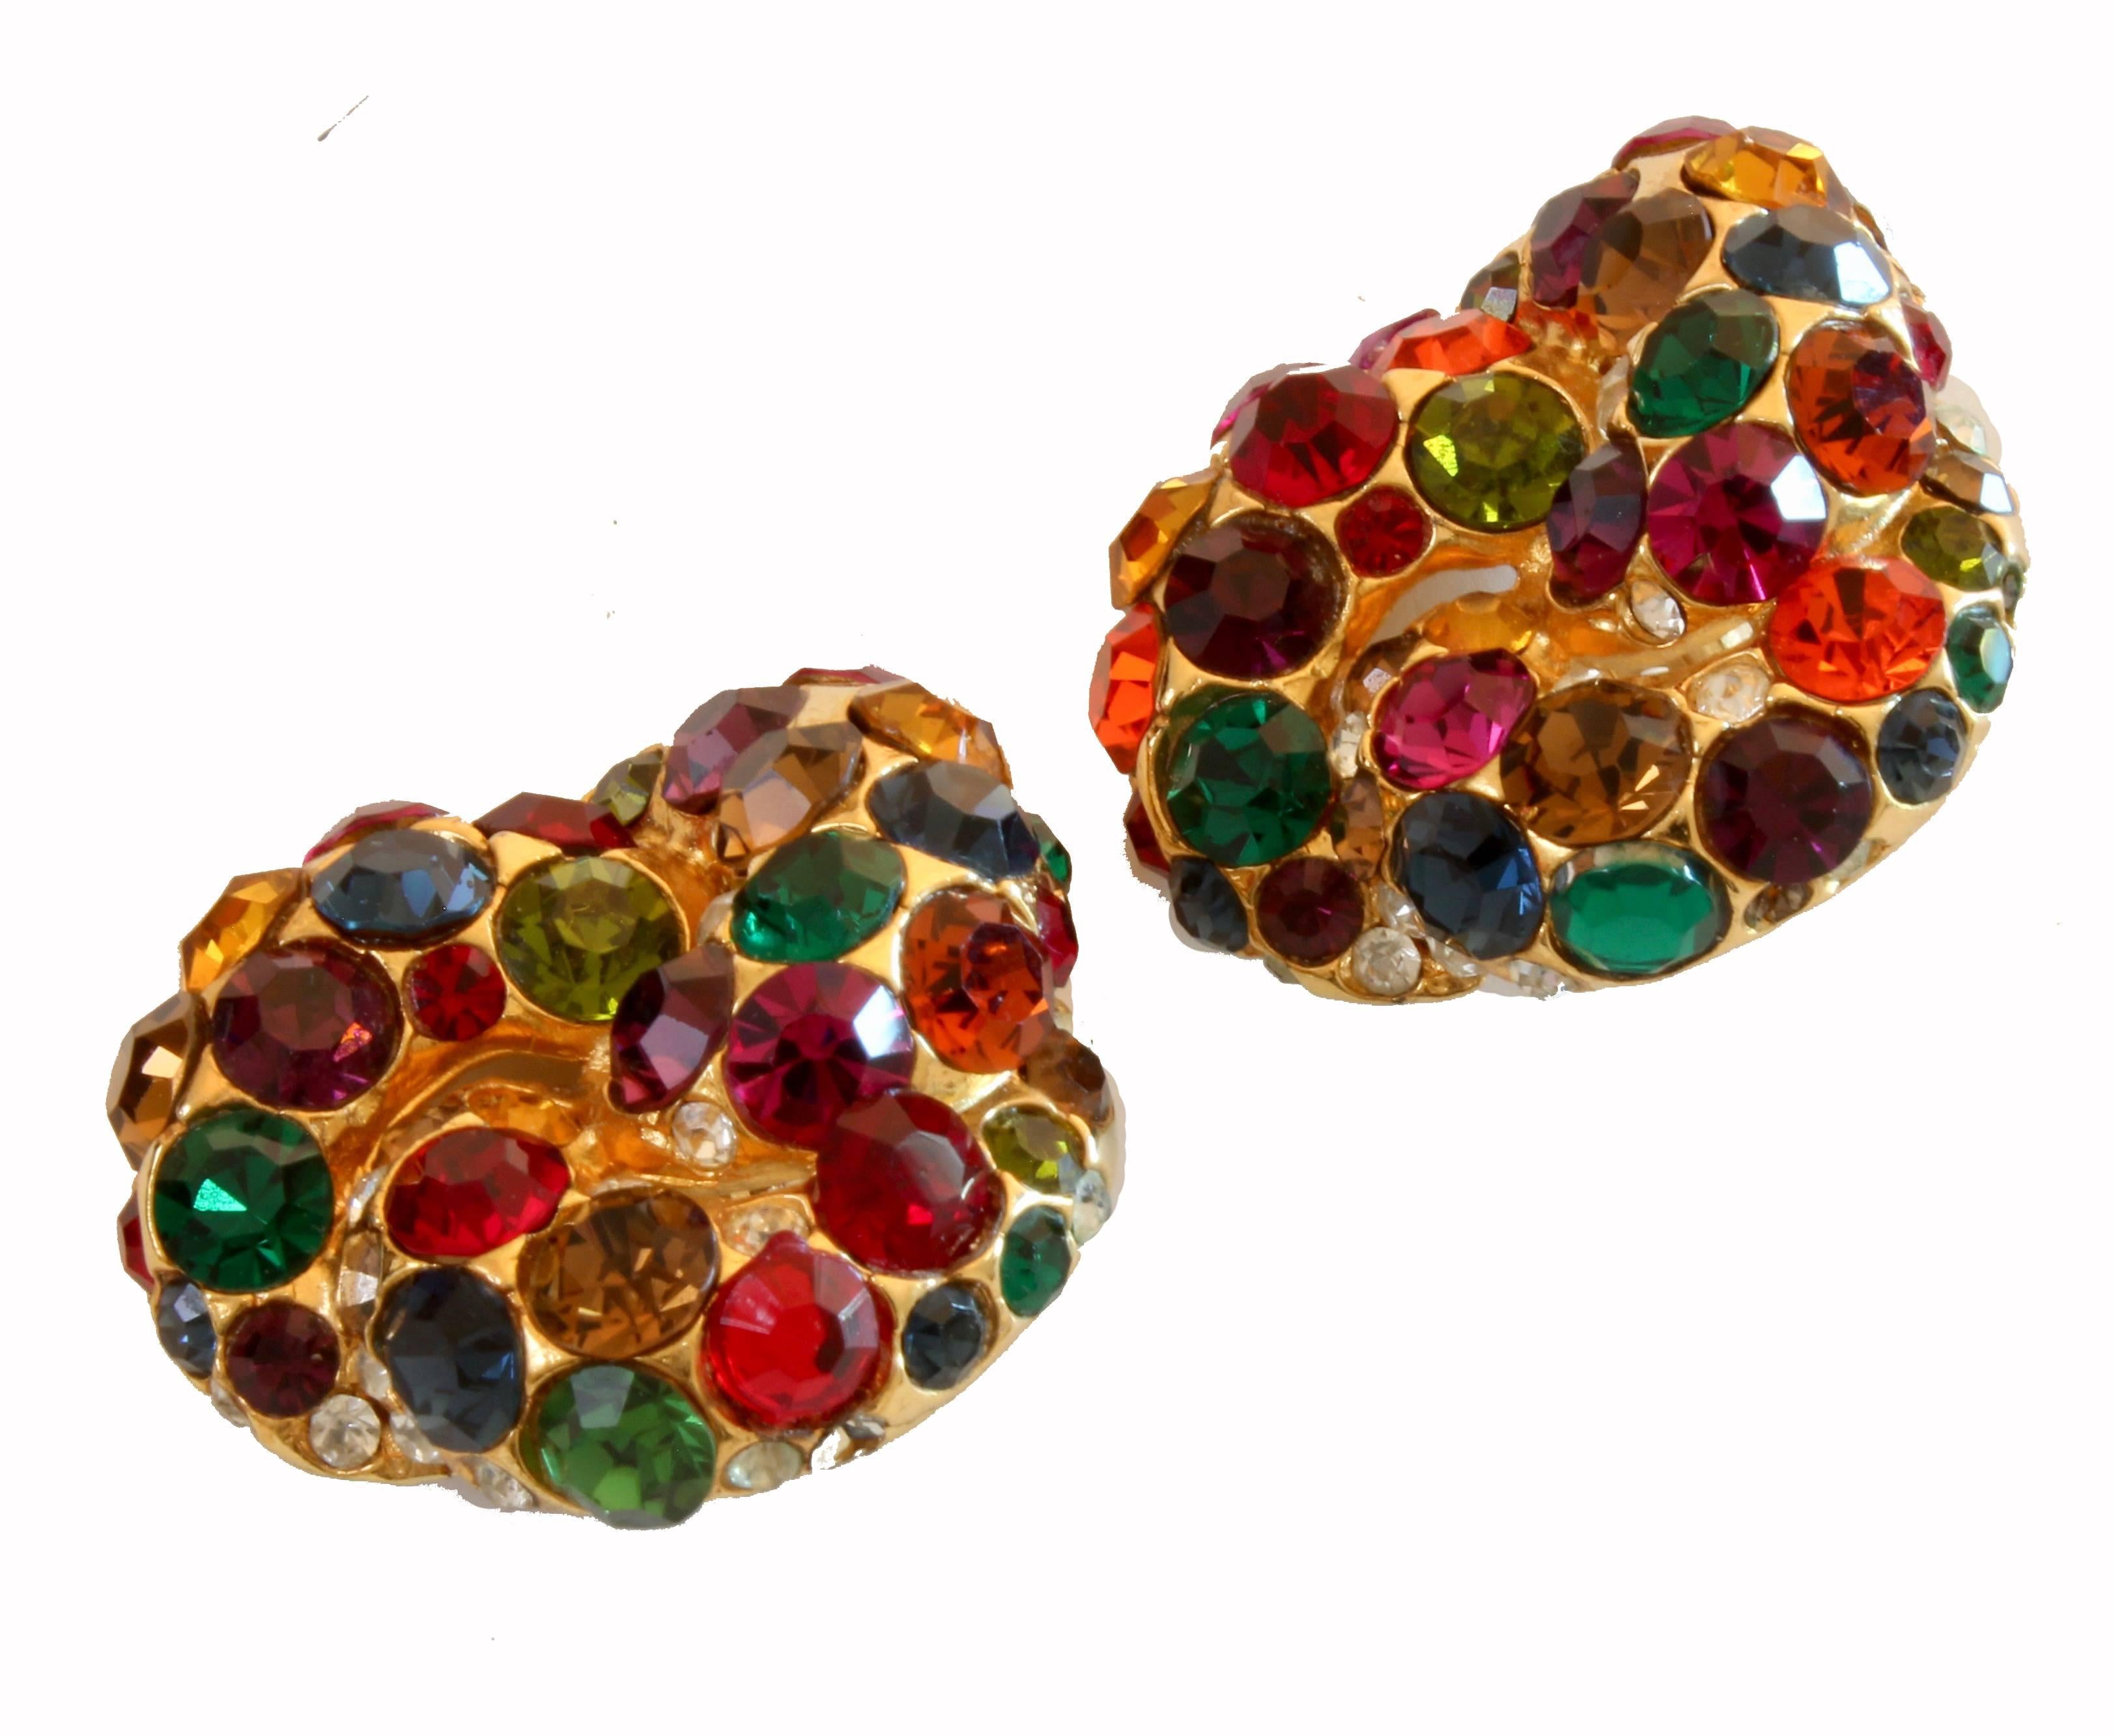 Here's a cool pair of earrings signed BLANCA.  Made from gold metal, these clip style earrings are covered in multi-color rhinestones.  Perfect for making a statement! They measure appx 1.5in H x 1.45in W.  In very good preowned condition with some